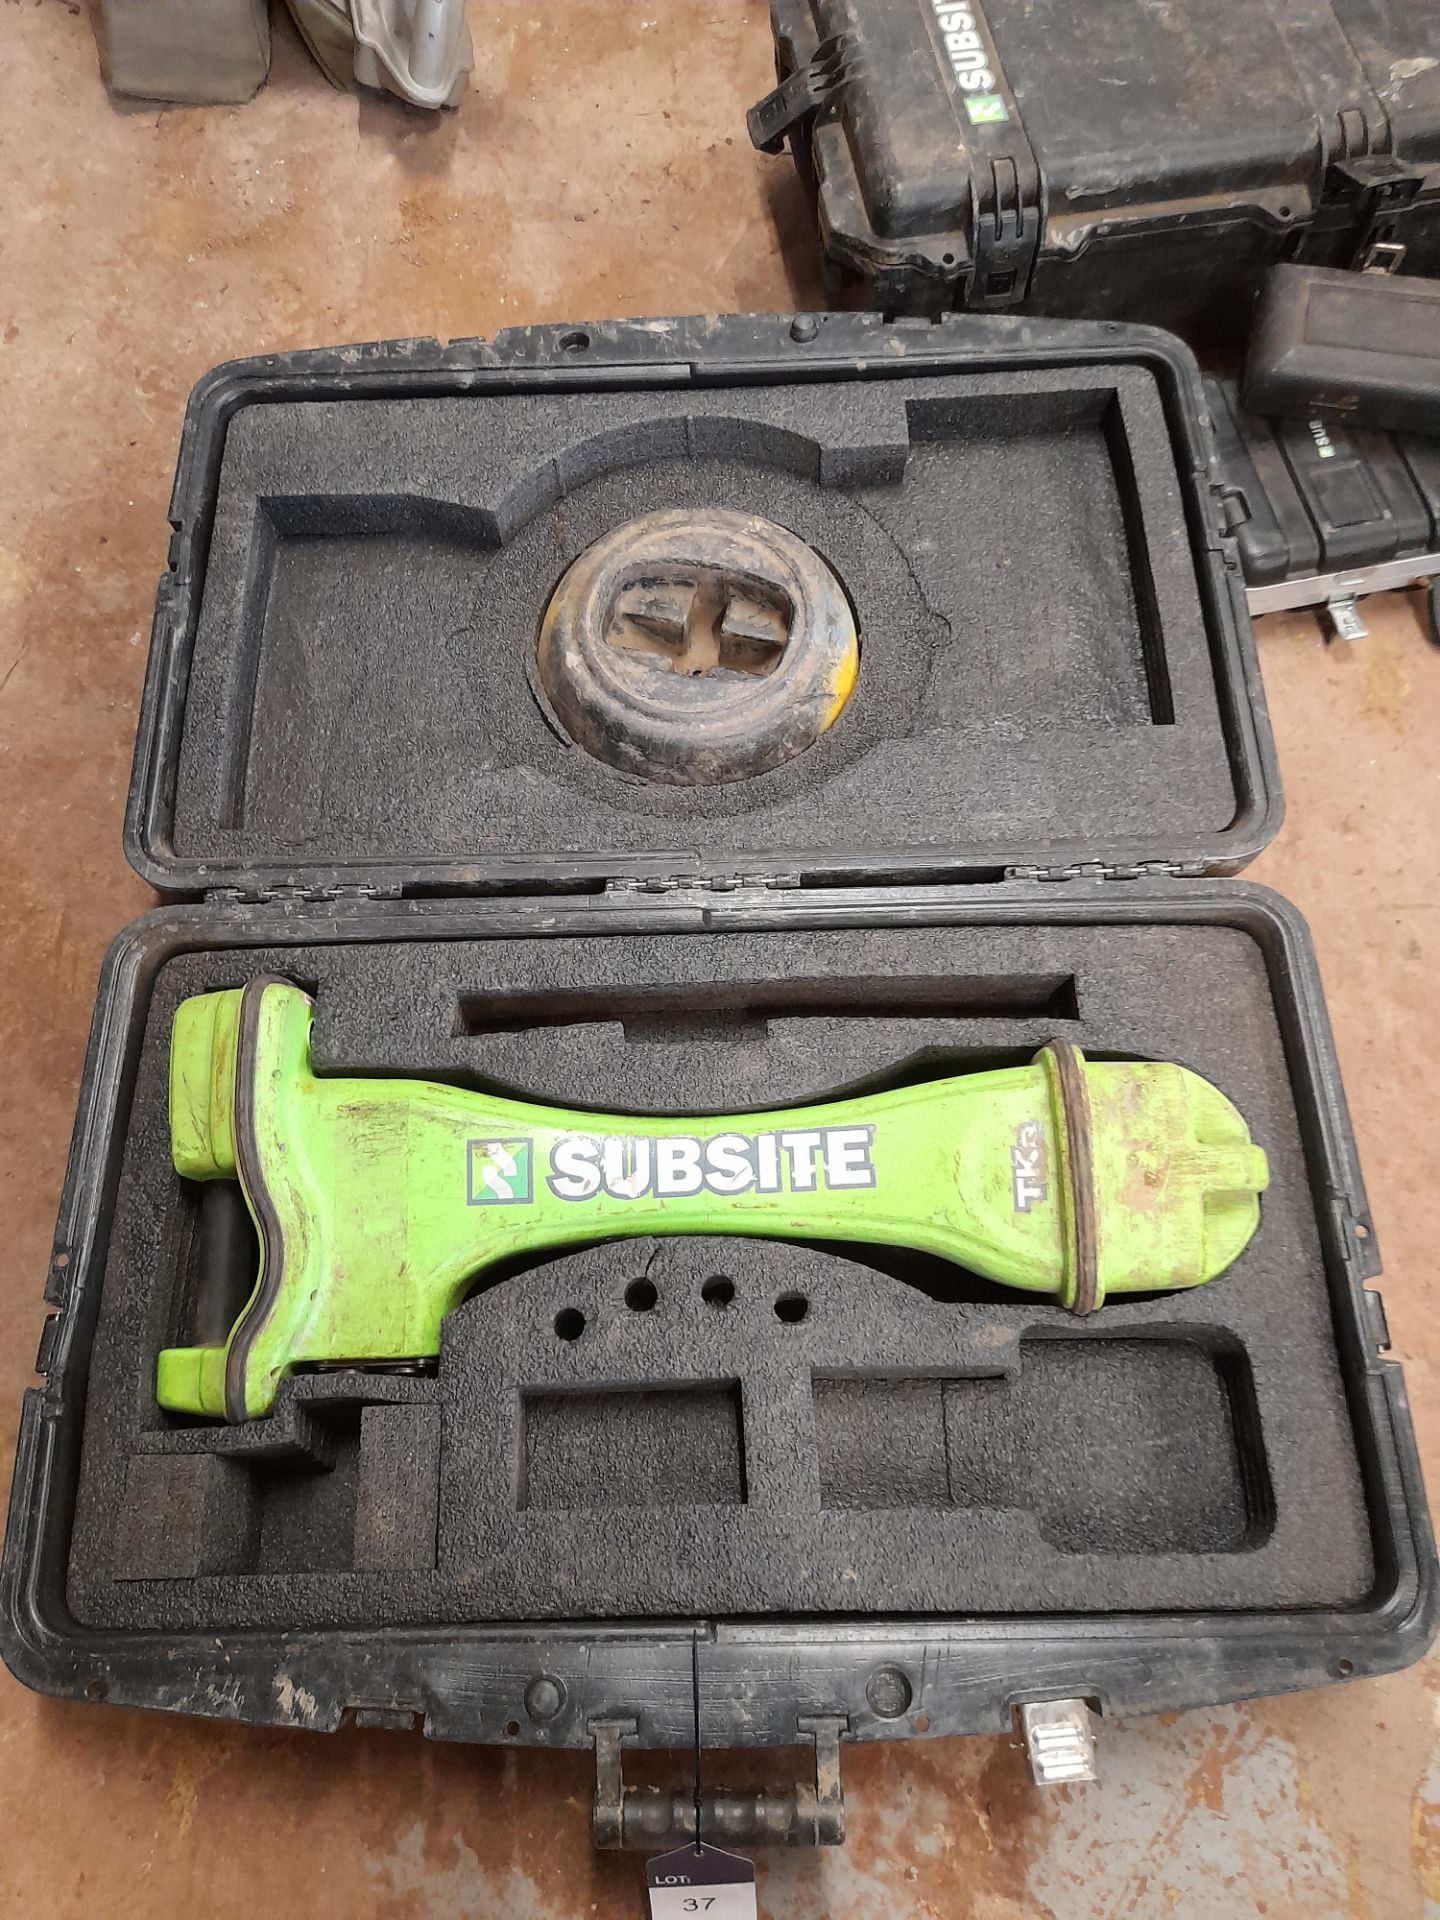 Subsite TKQ locator/ HDD Guidance System, in case